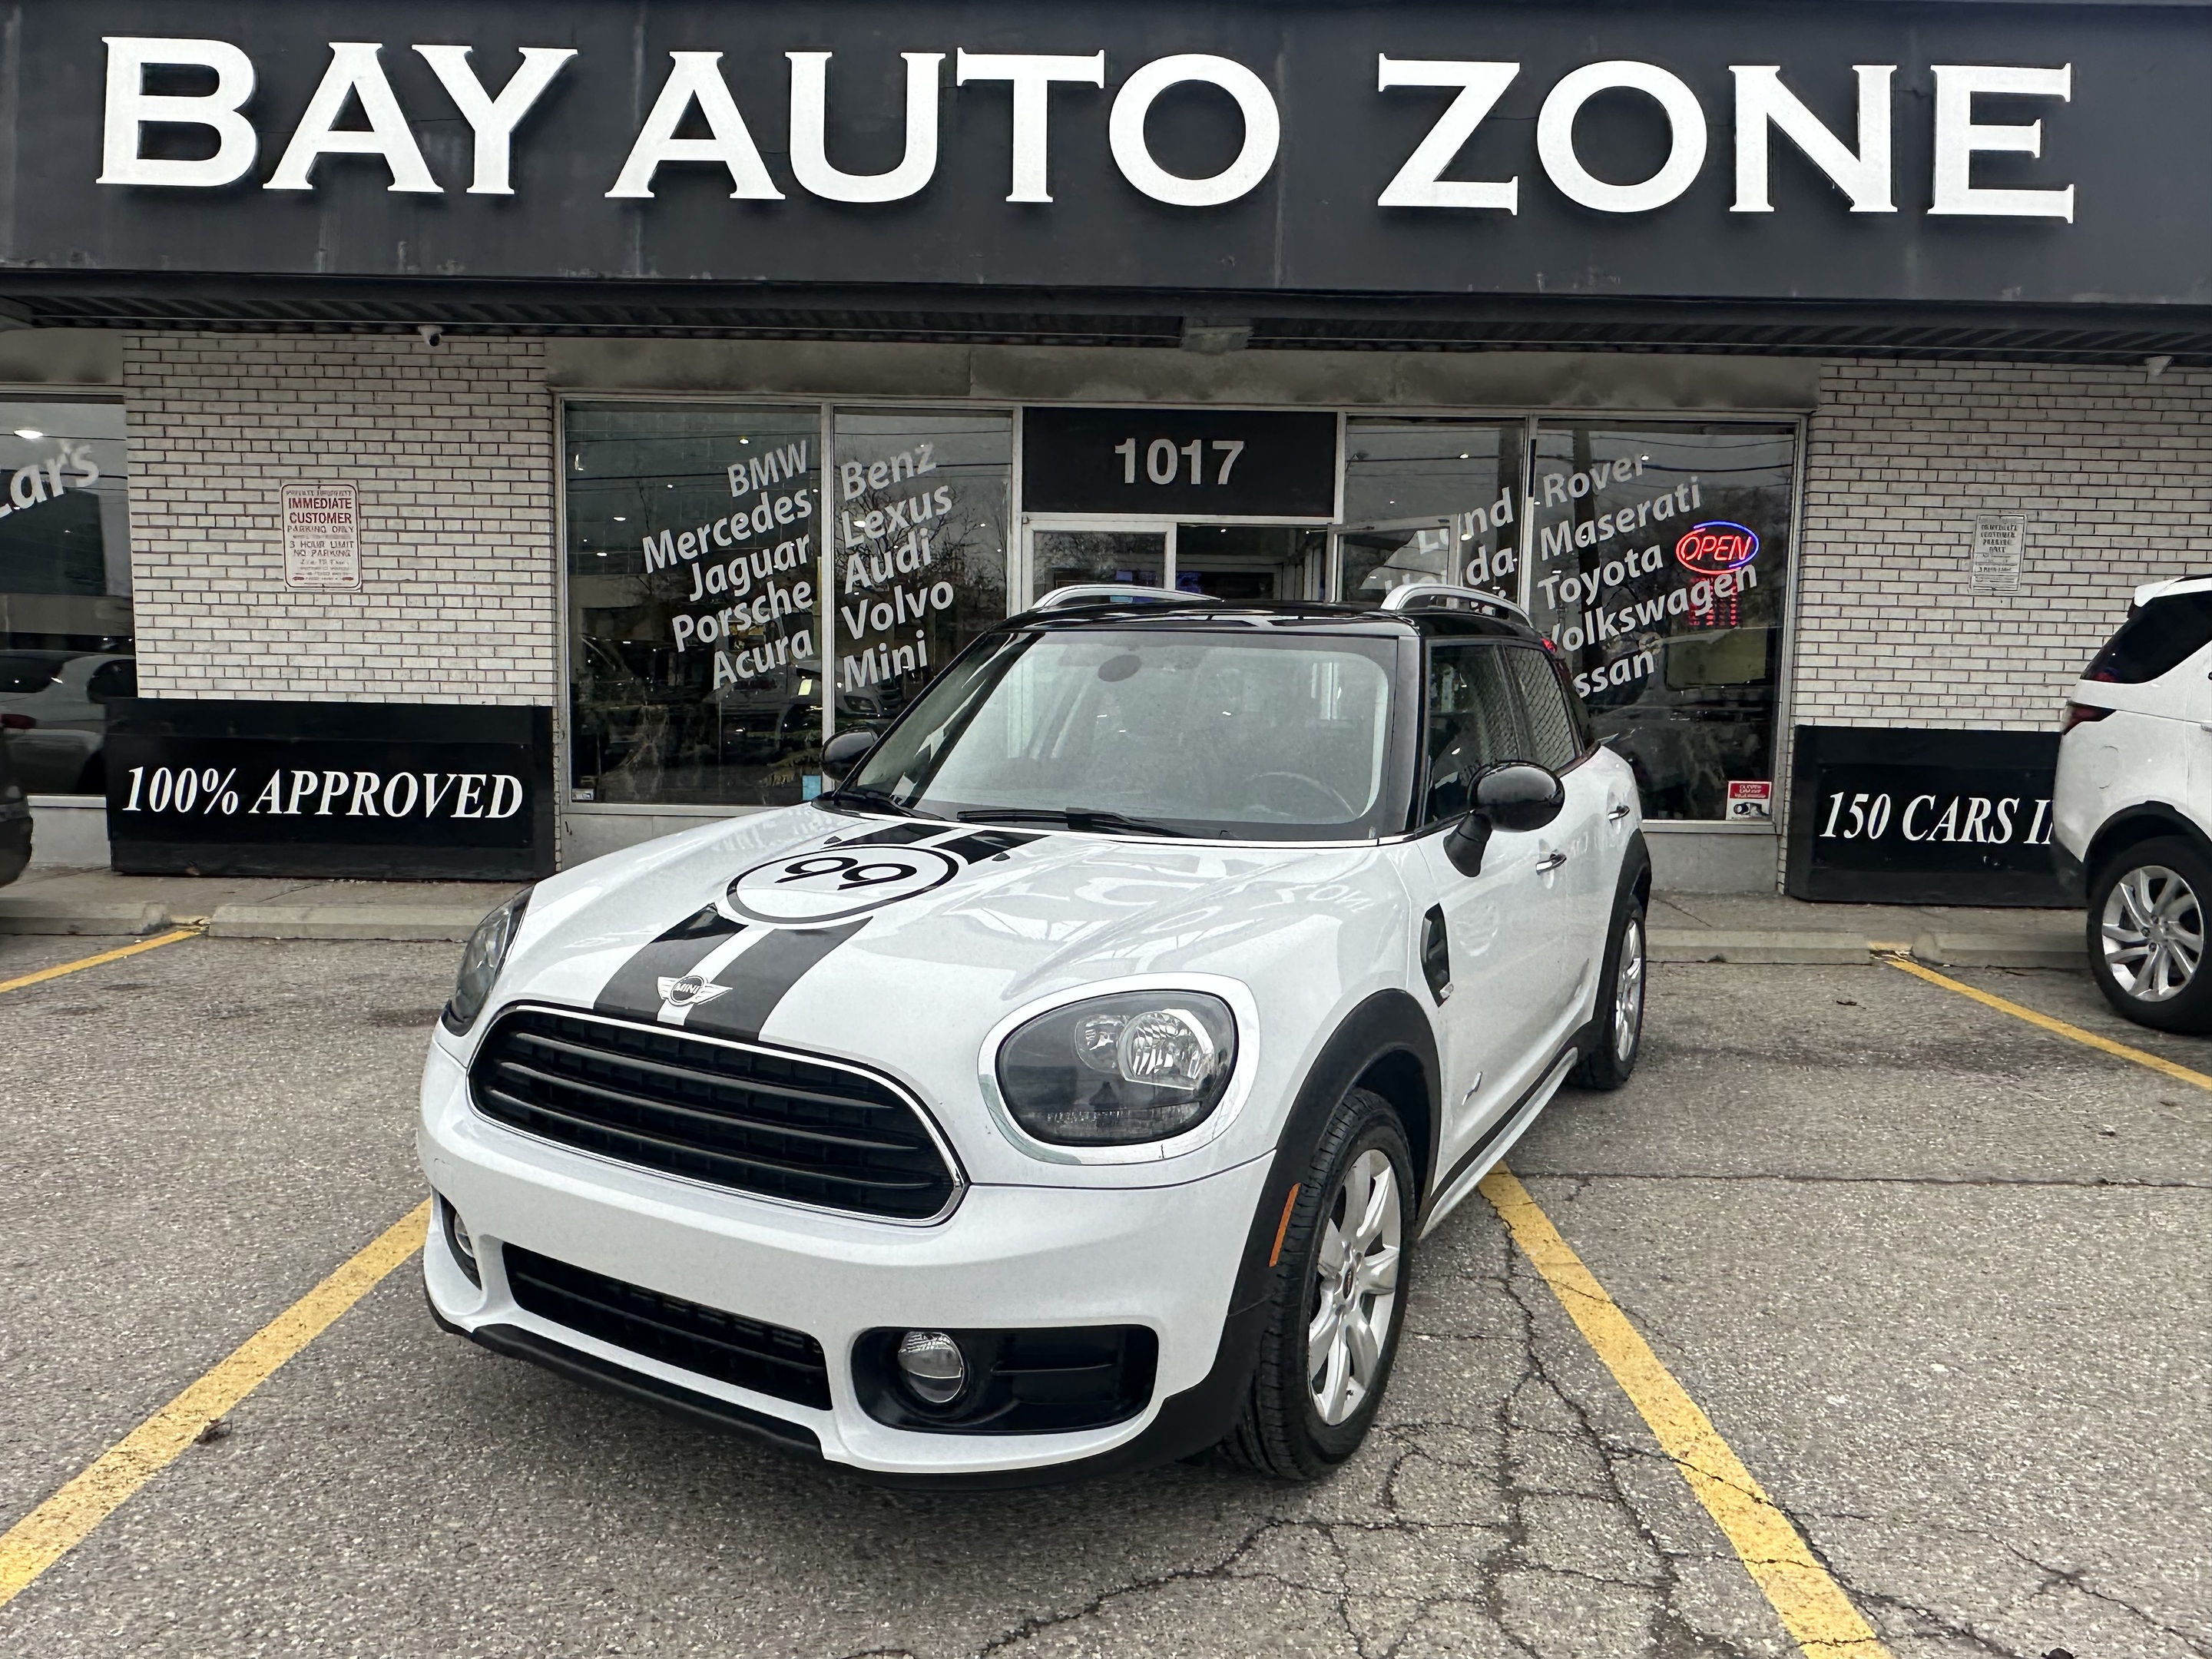 2017 MINI Cooper Countryman ALL4 STYLE LOADED PKG+NAVI+R CAM+PANO ROOF